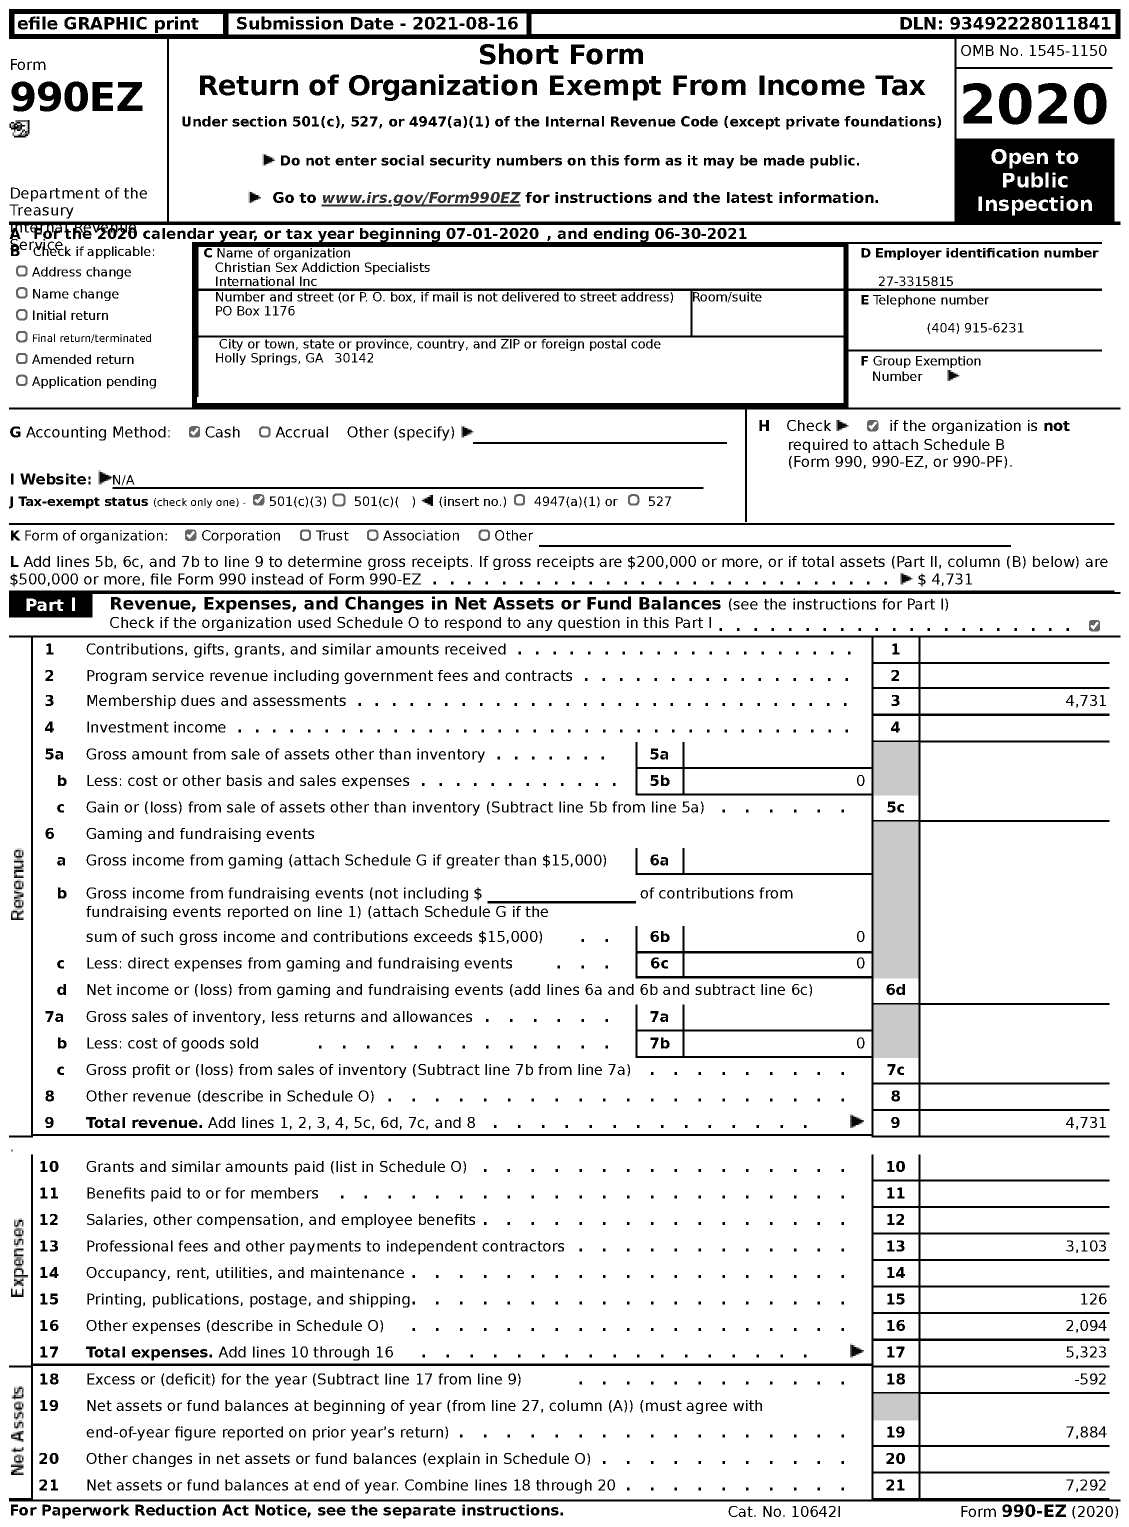 Image of first page of 2020 Form 990EZ for Christian Sex Addiction Specialists